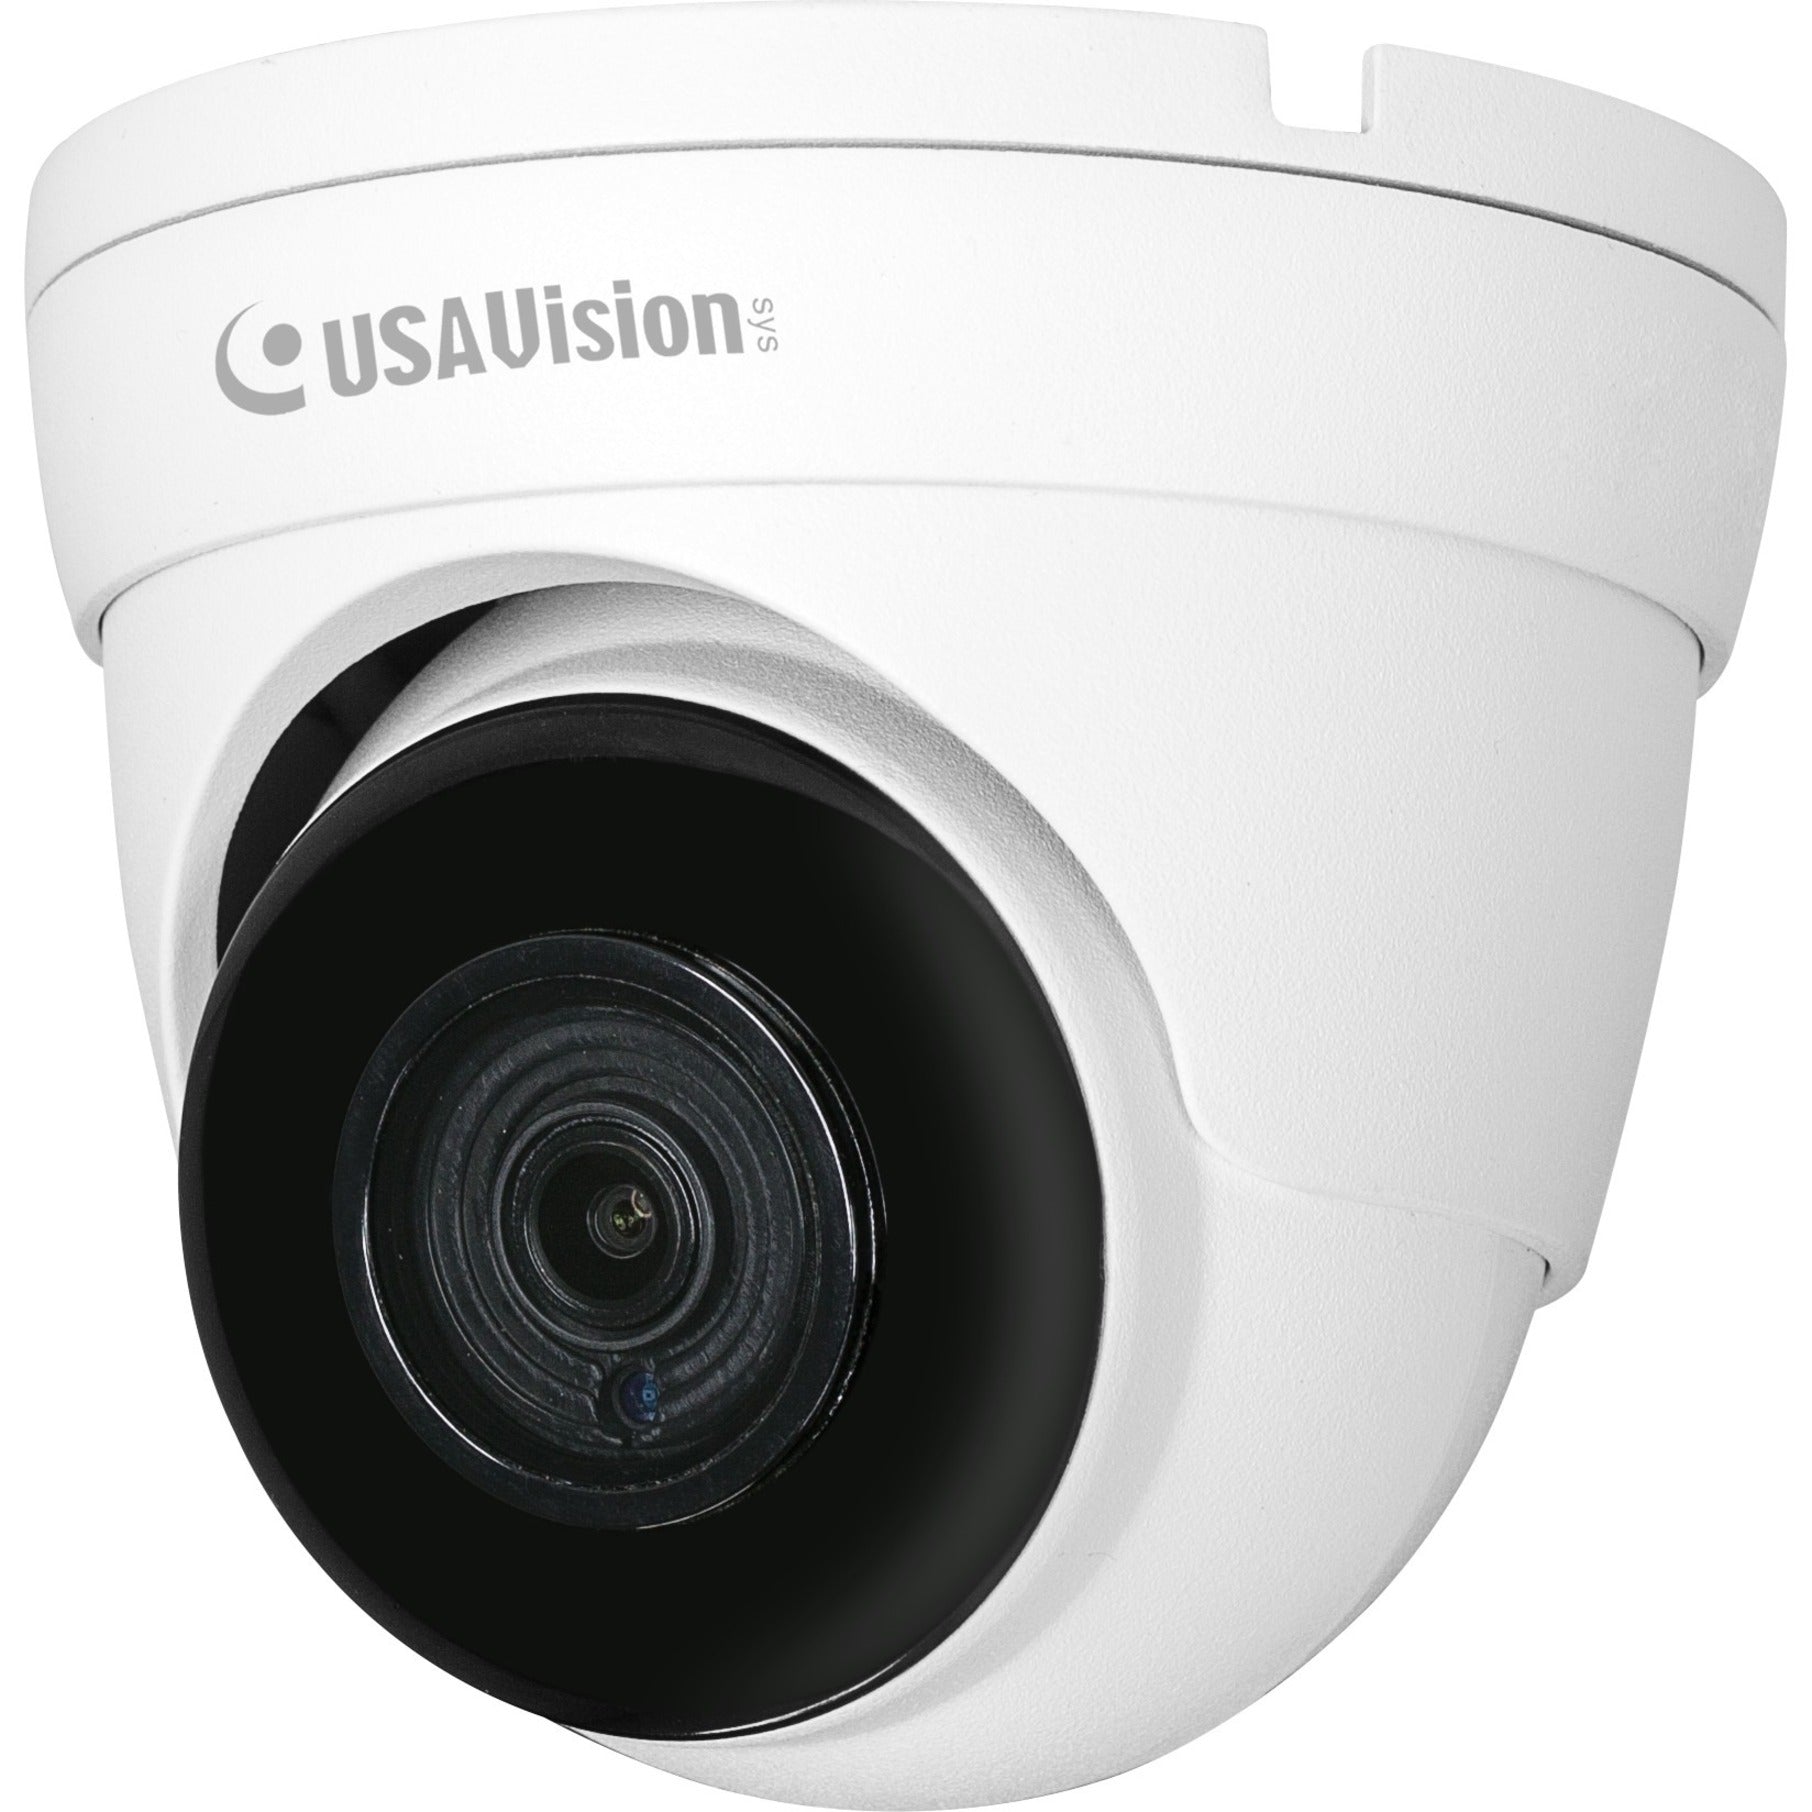 GeoVision UA-CR200F2 2 MP Super Low Lux WDR IR Eyeball Dome Camera, Outdoor Surveillance Camera with Wide Dynamic Range and Infrared Night Vision